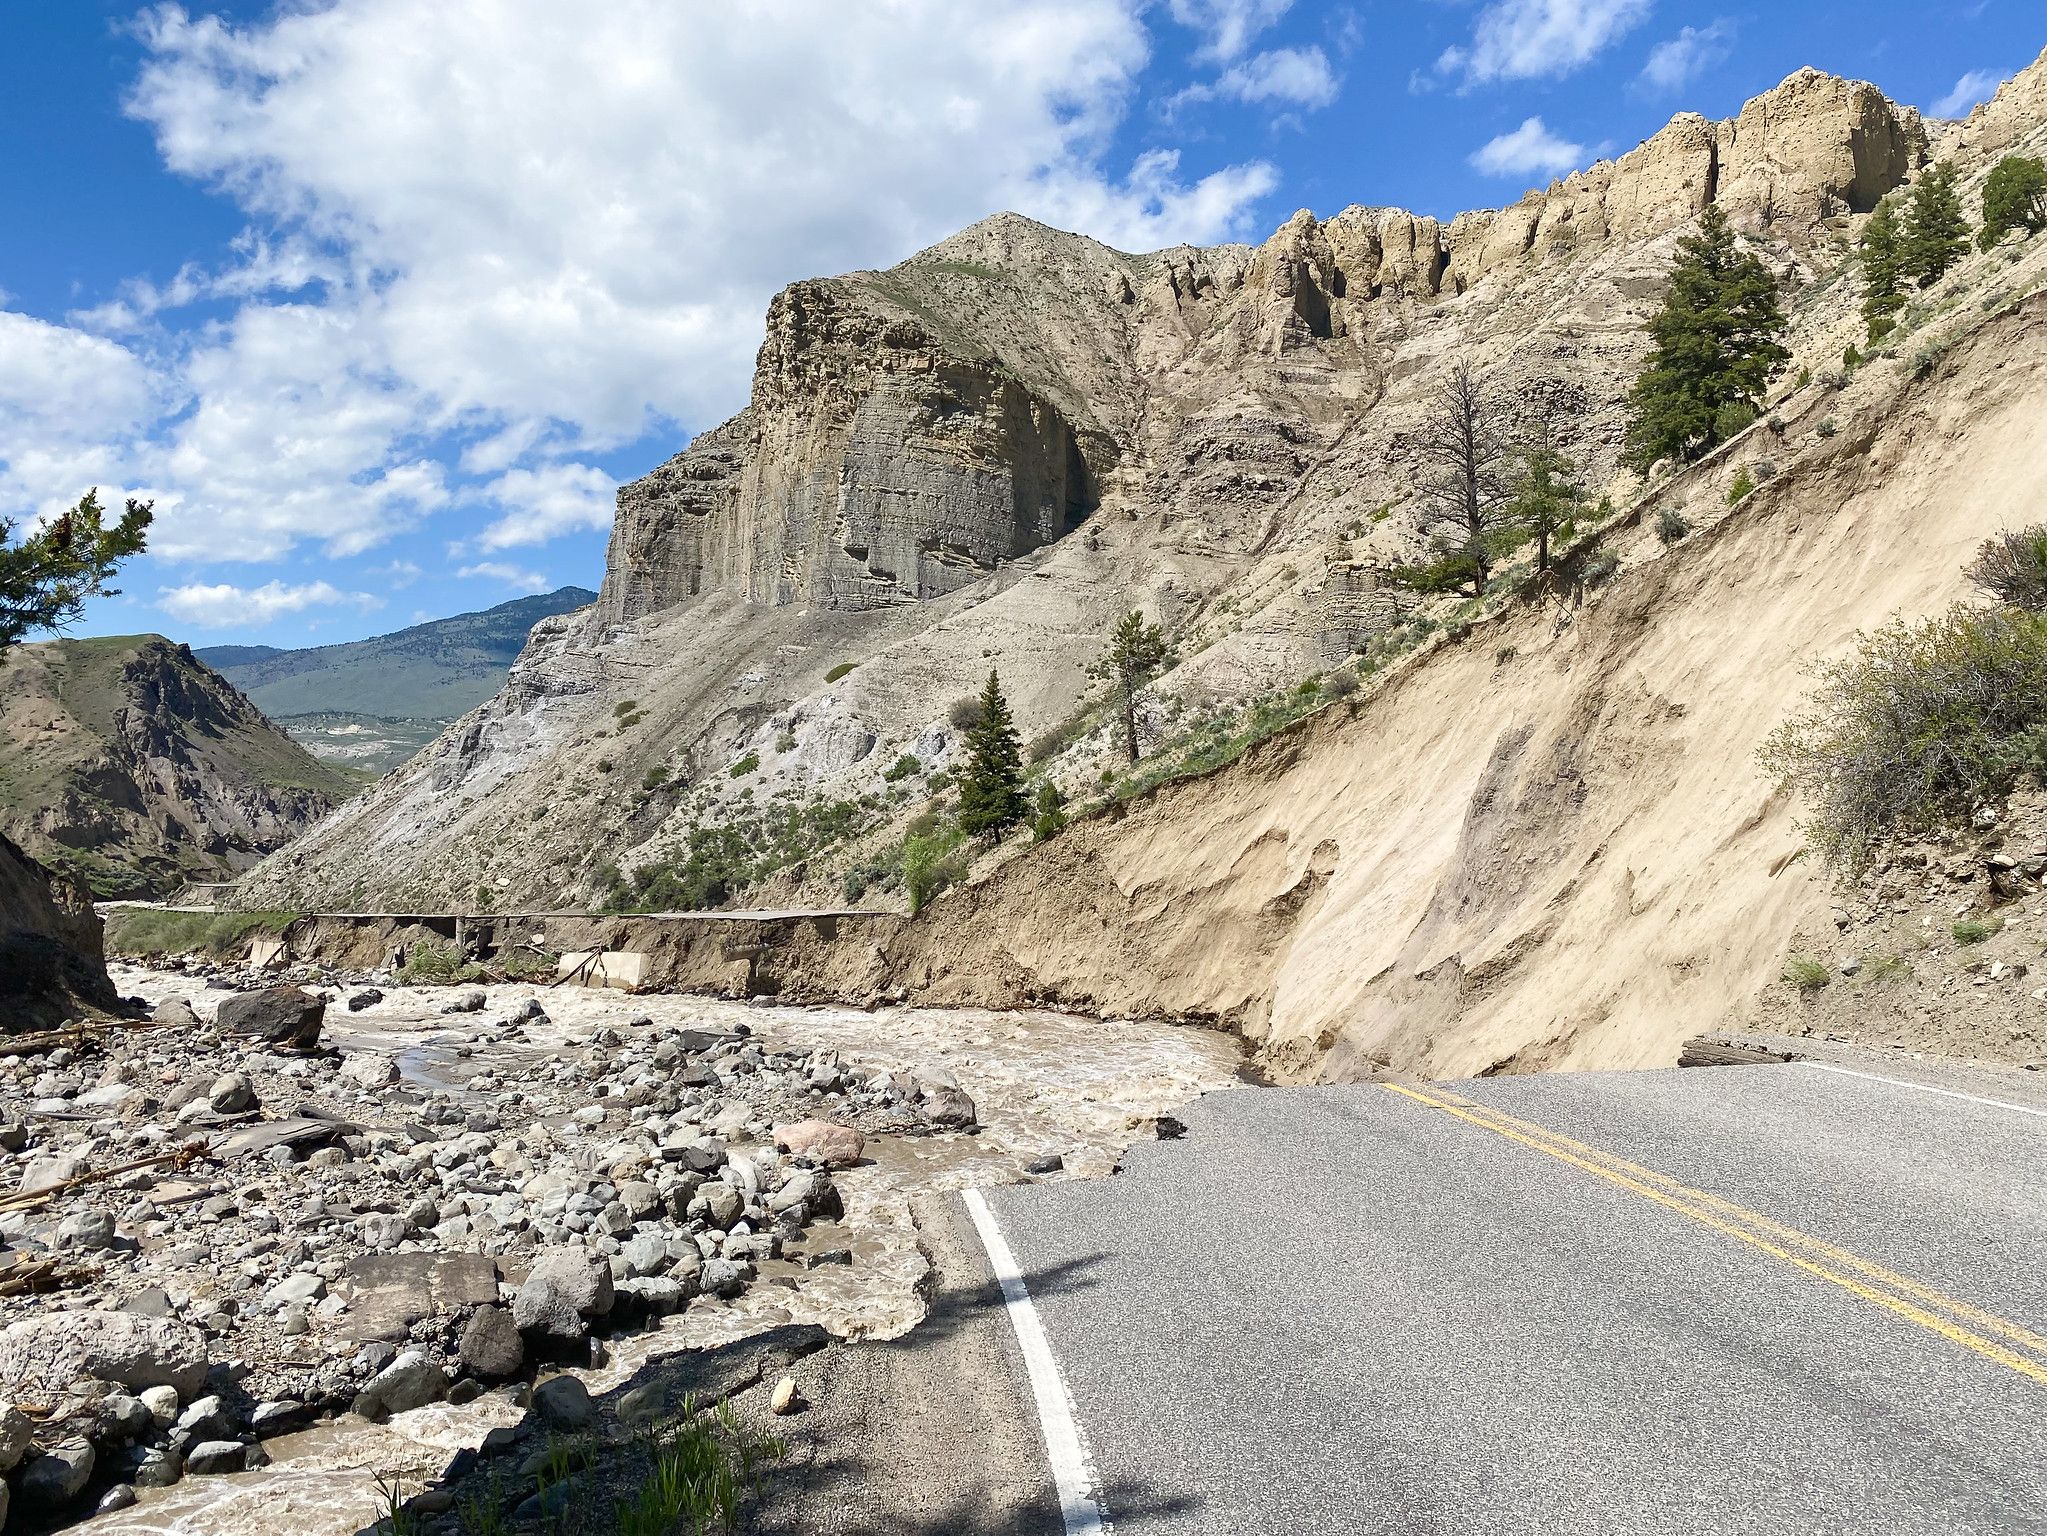 A photo of the North Entrance Road washout.